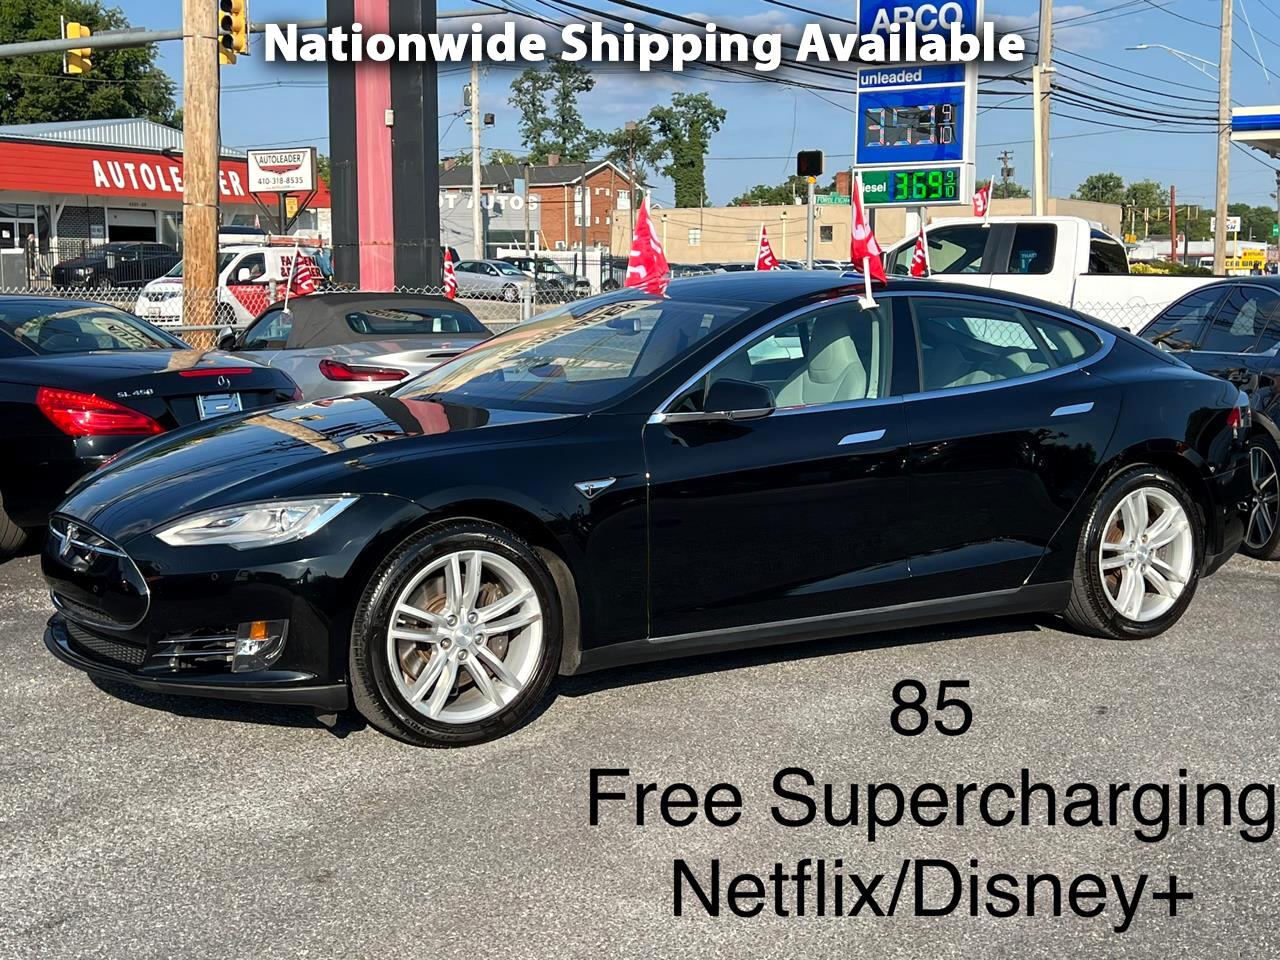 Tesla Model S 4dr Sdn 85 kWh Battery 2014